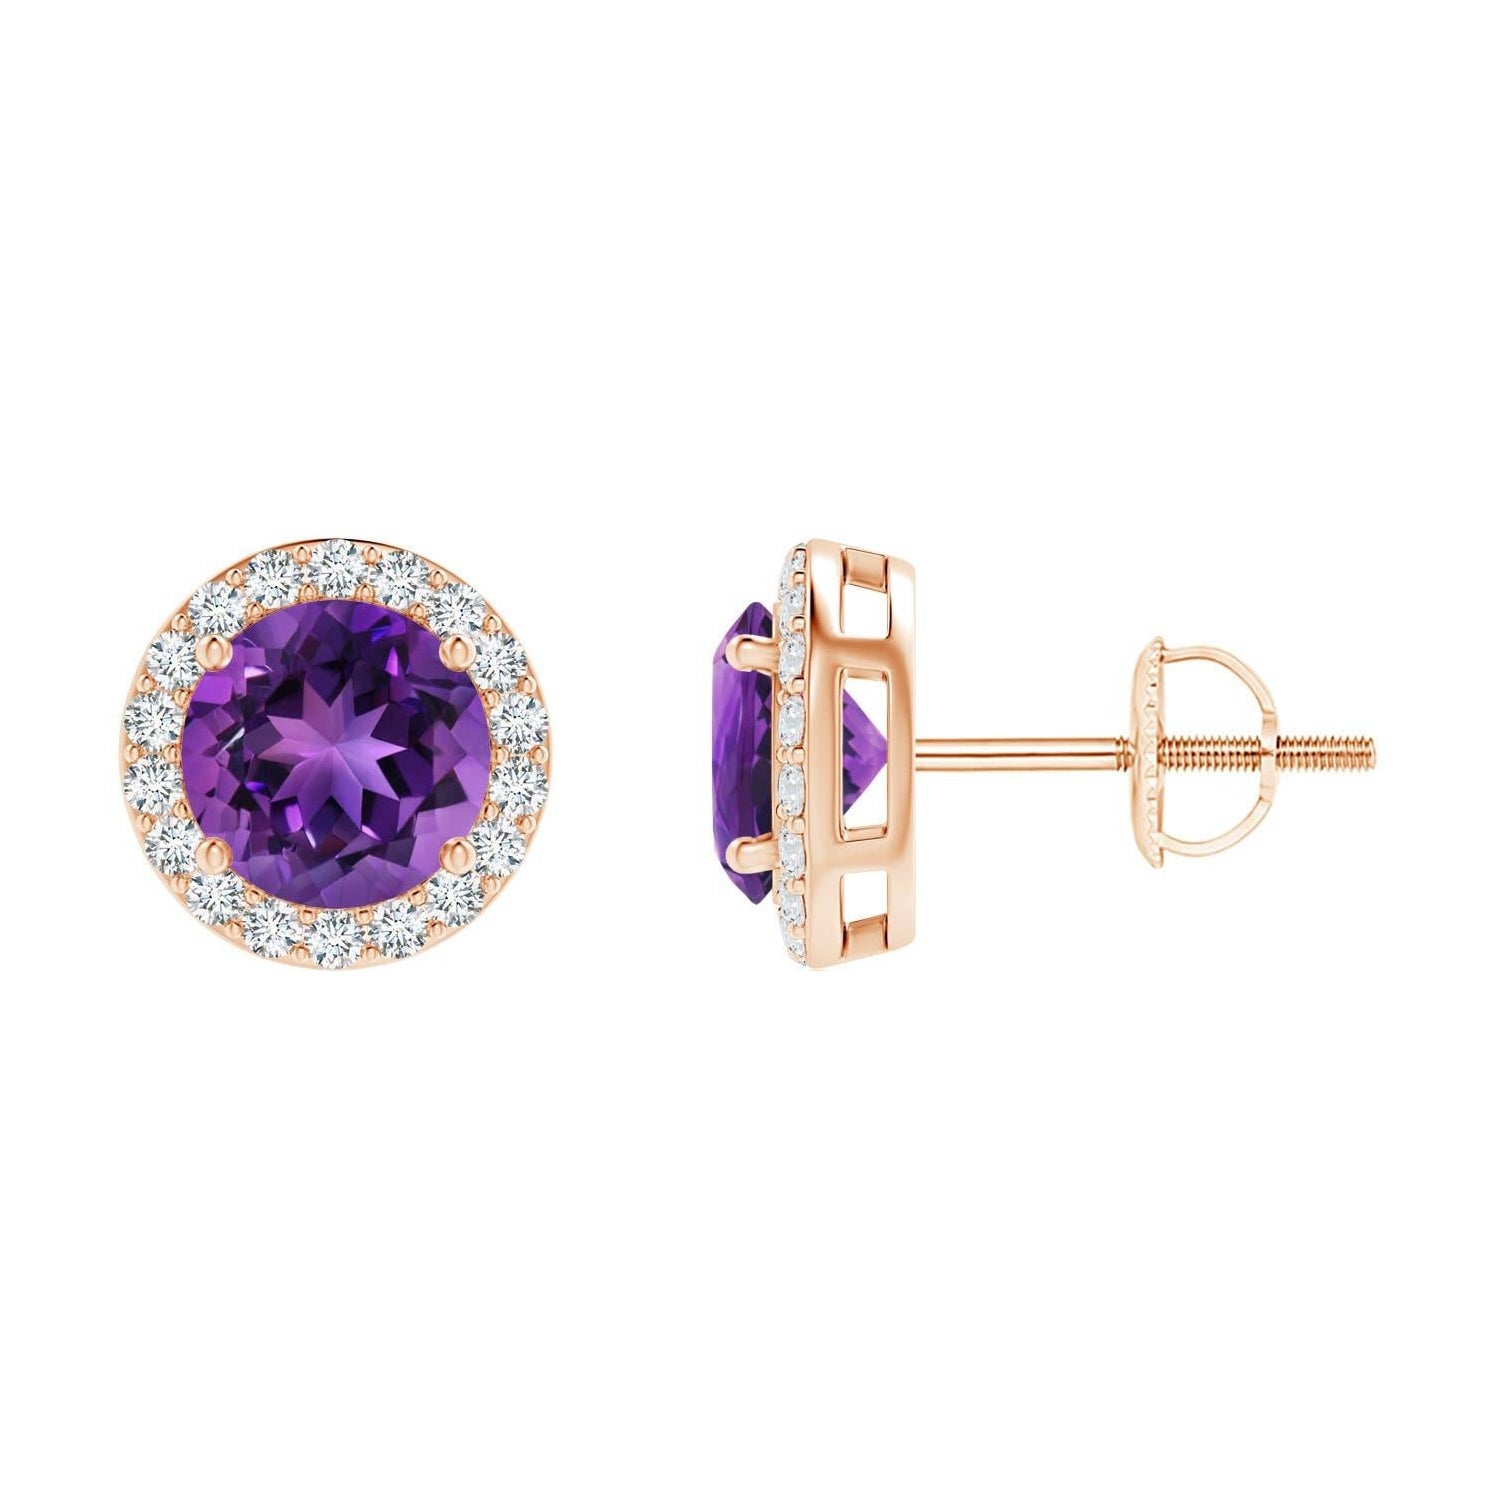 Natural Vintage Round 1.6ct Amethyst Halo Stud Earrings in 14K Rose Gold For Sale